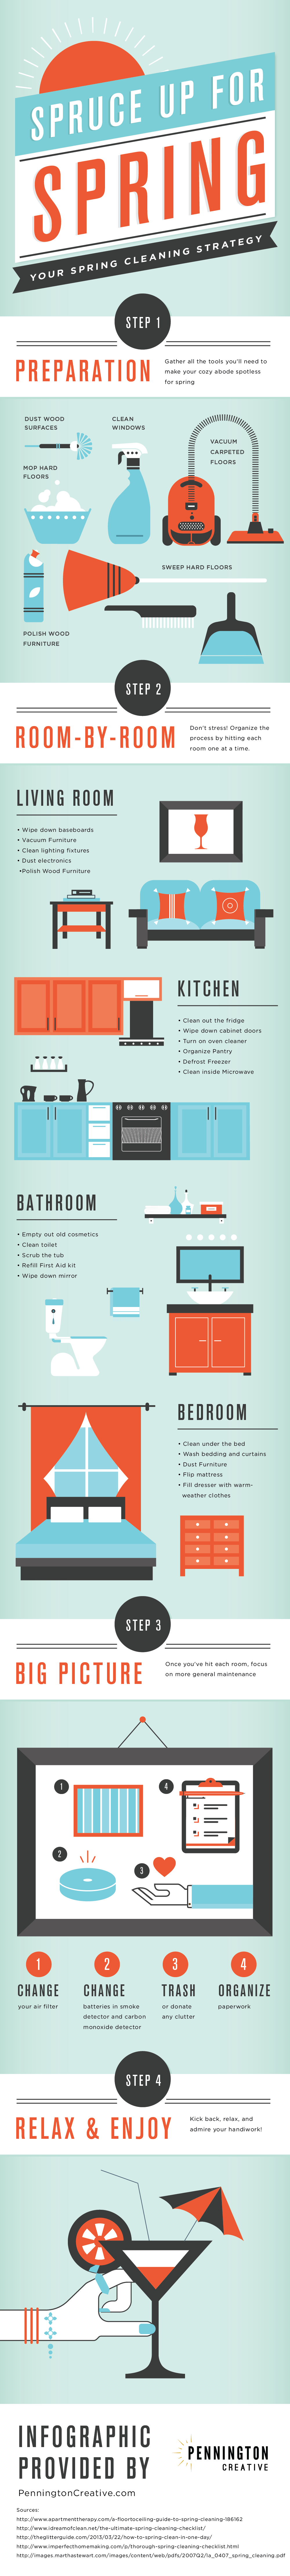 Spring Cleaning Infographic